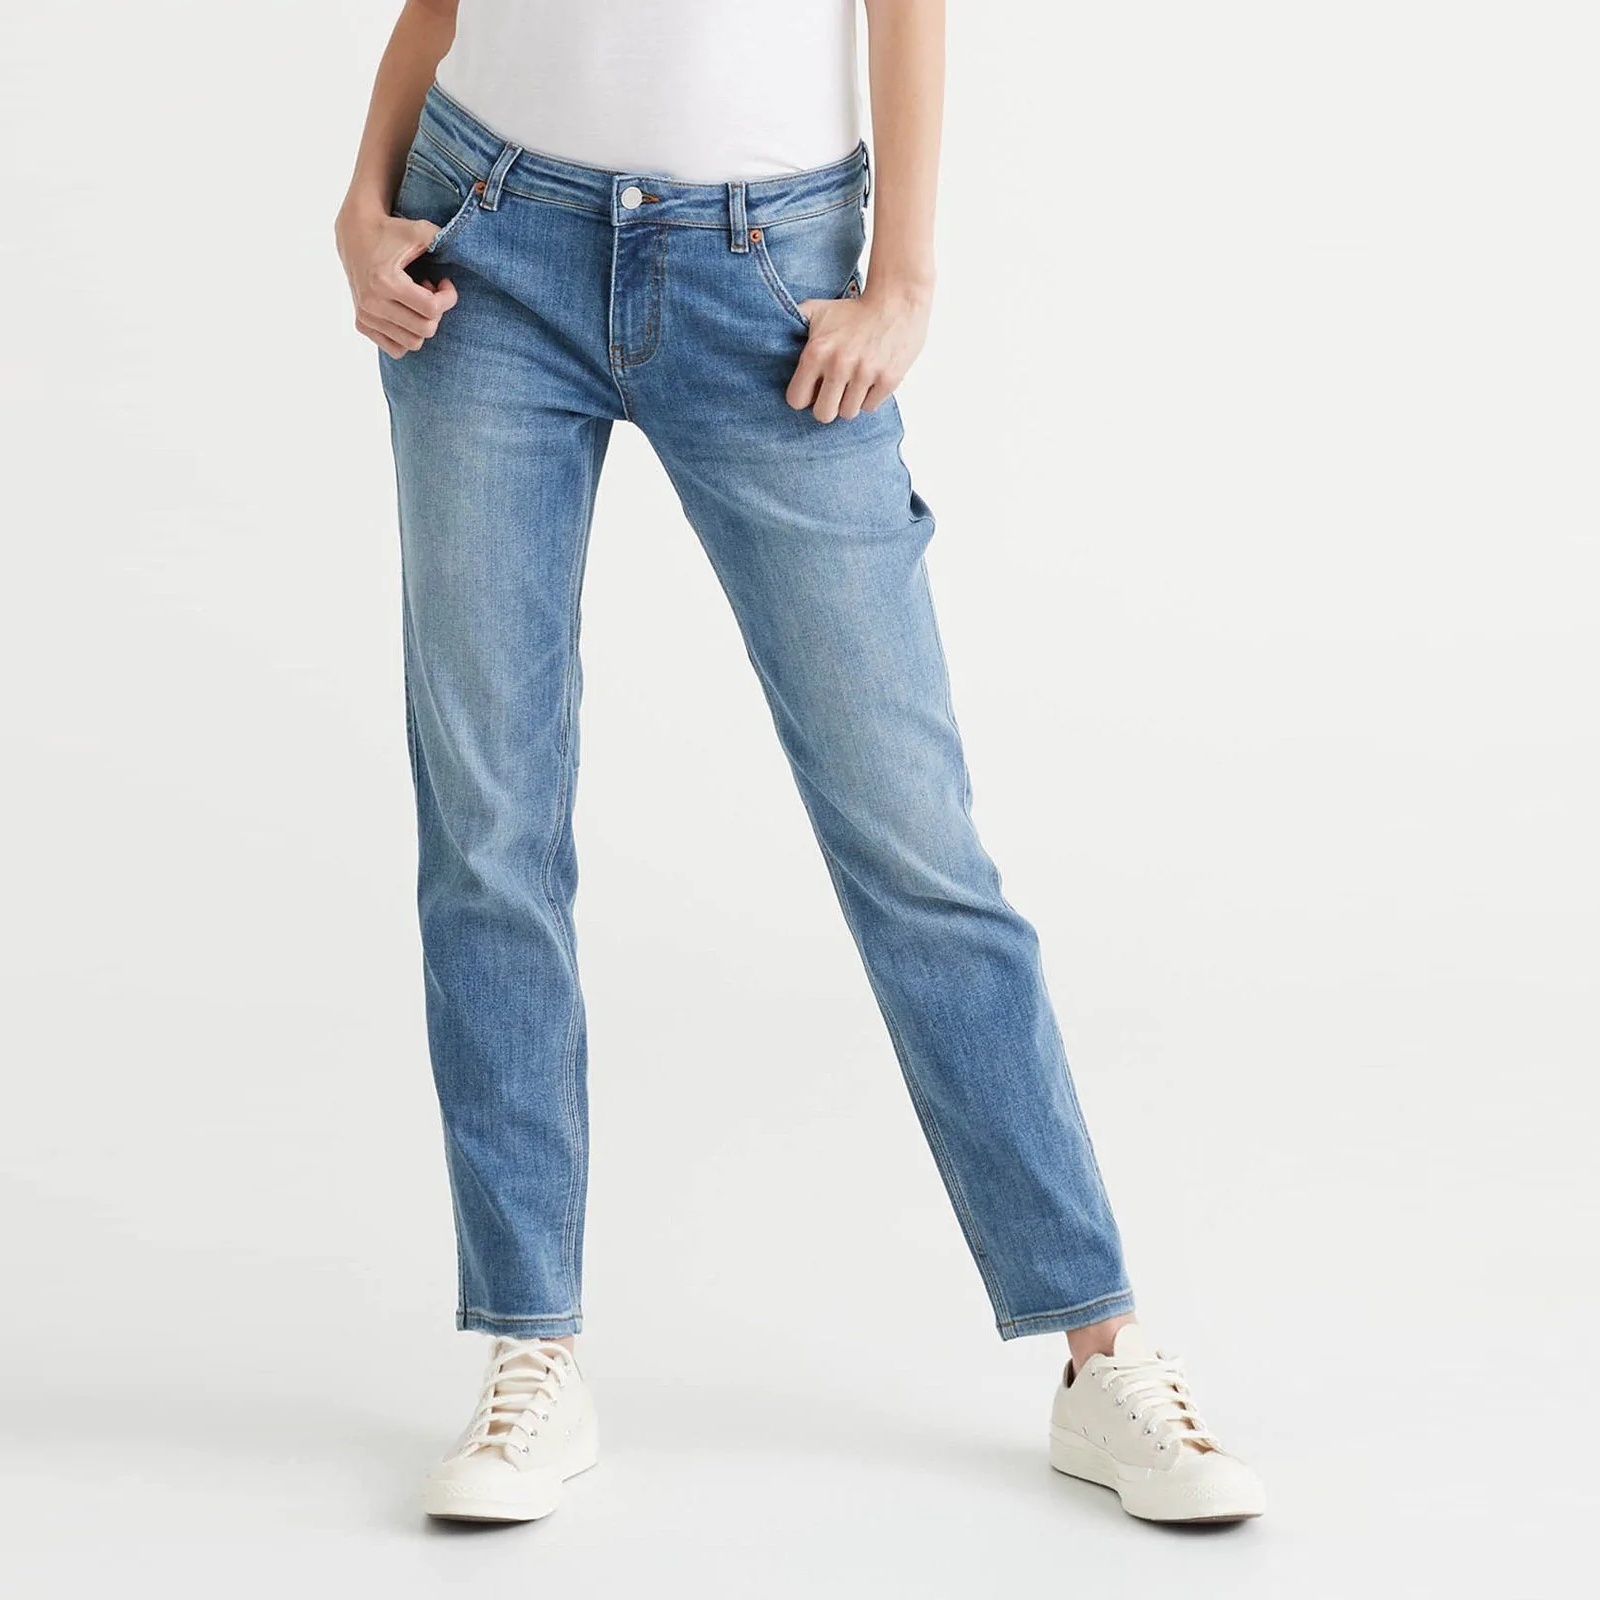 The Ex-Girlfriend Jean is Now a Thing, As More and More Men Start Shopping  the Women's Section